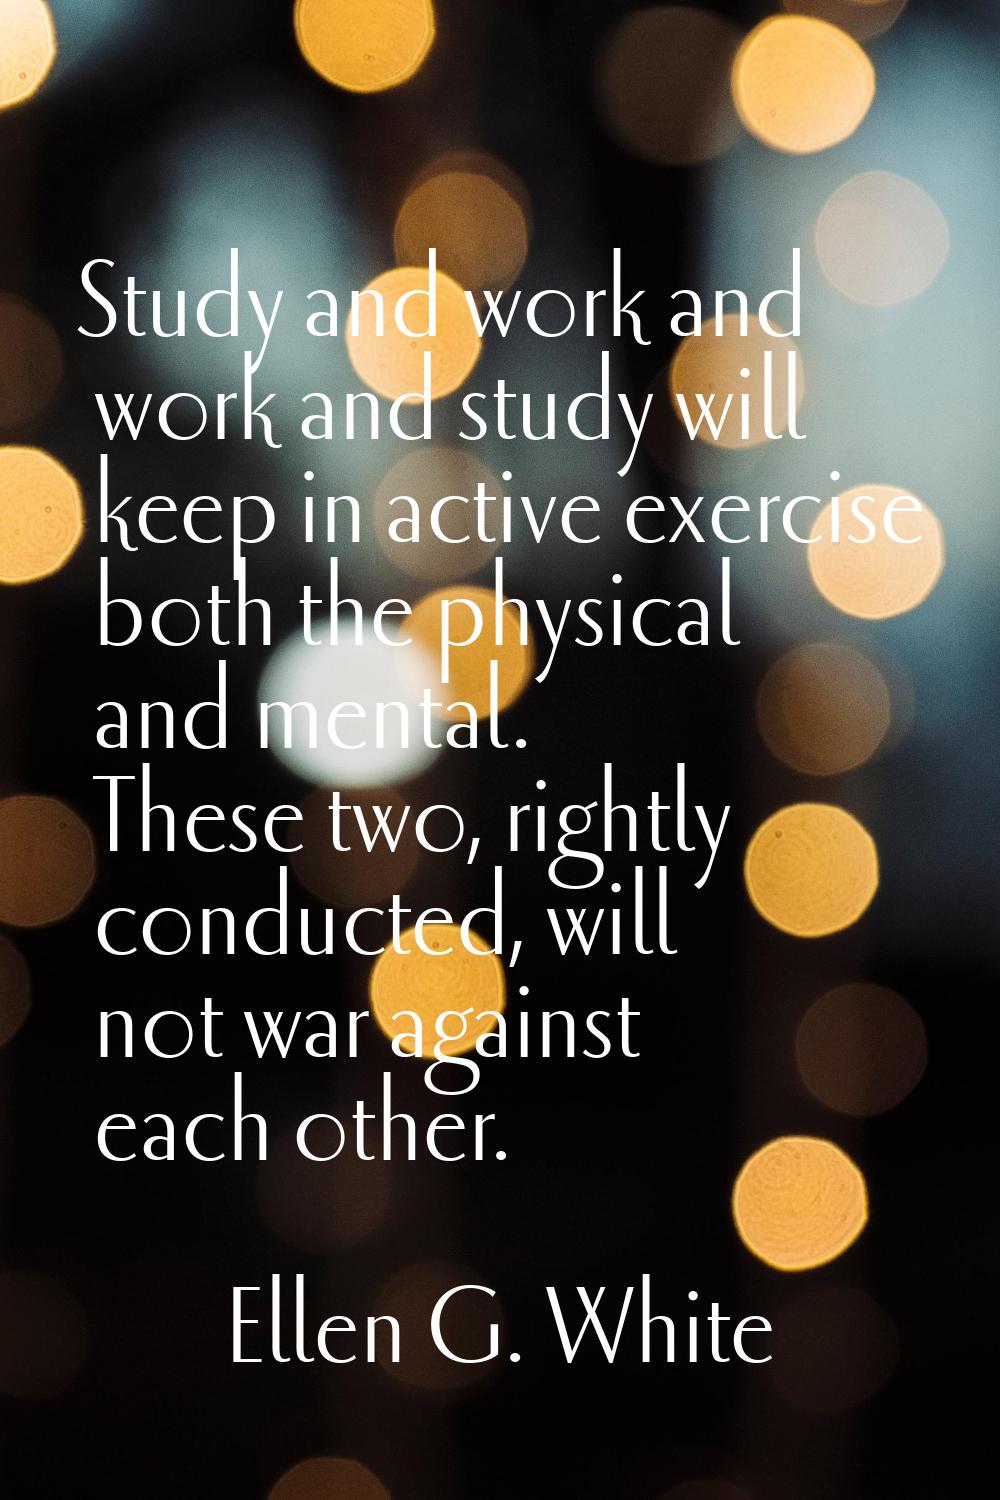 Study and work and work and study will keep in active exercise both the physical and mental. These 